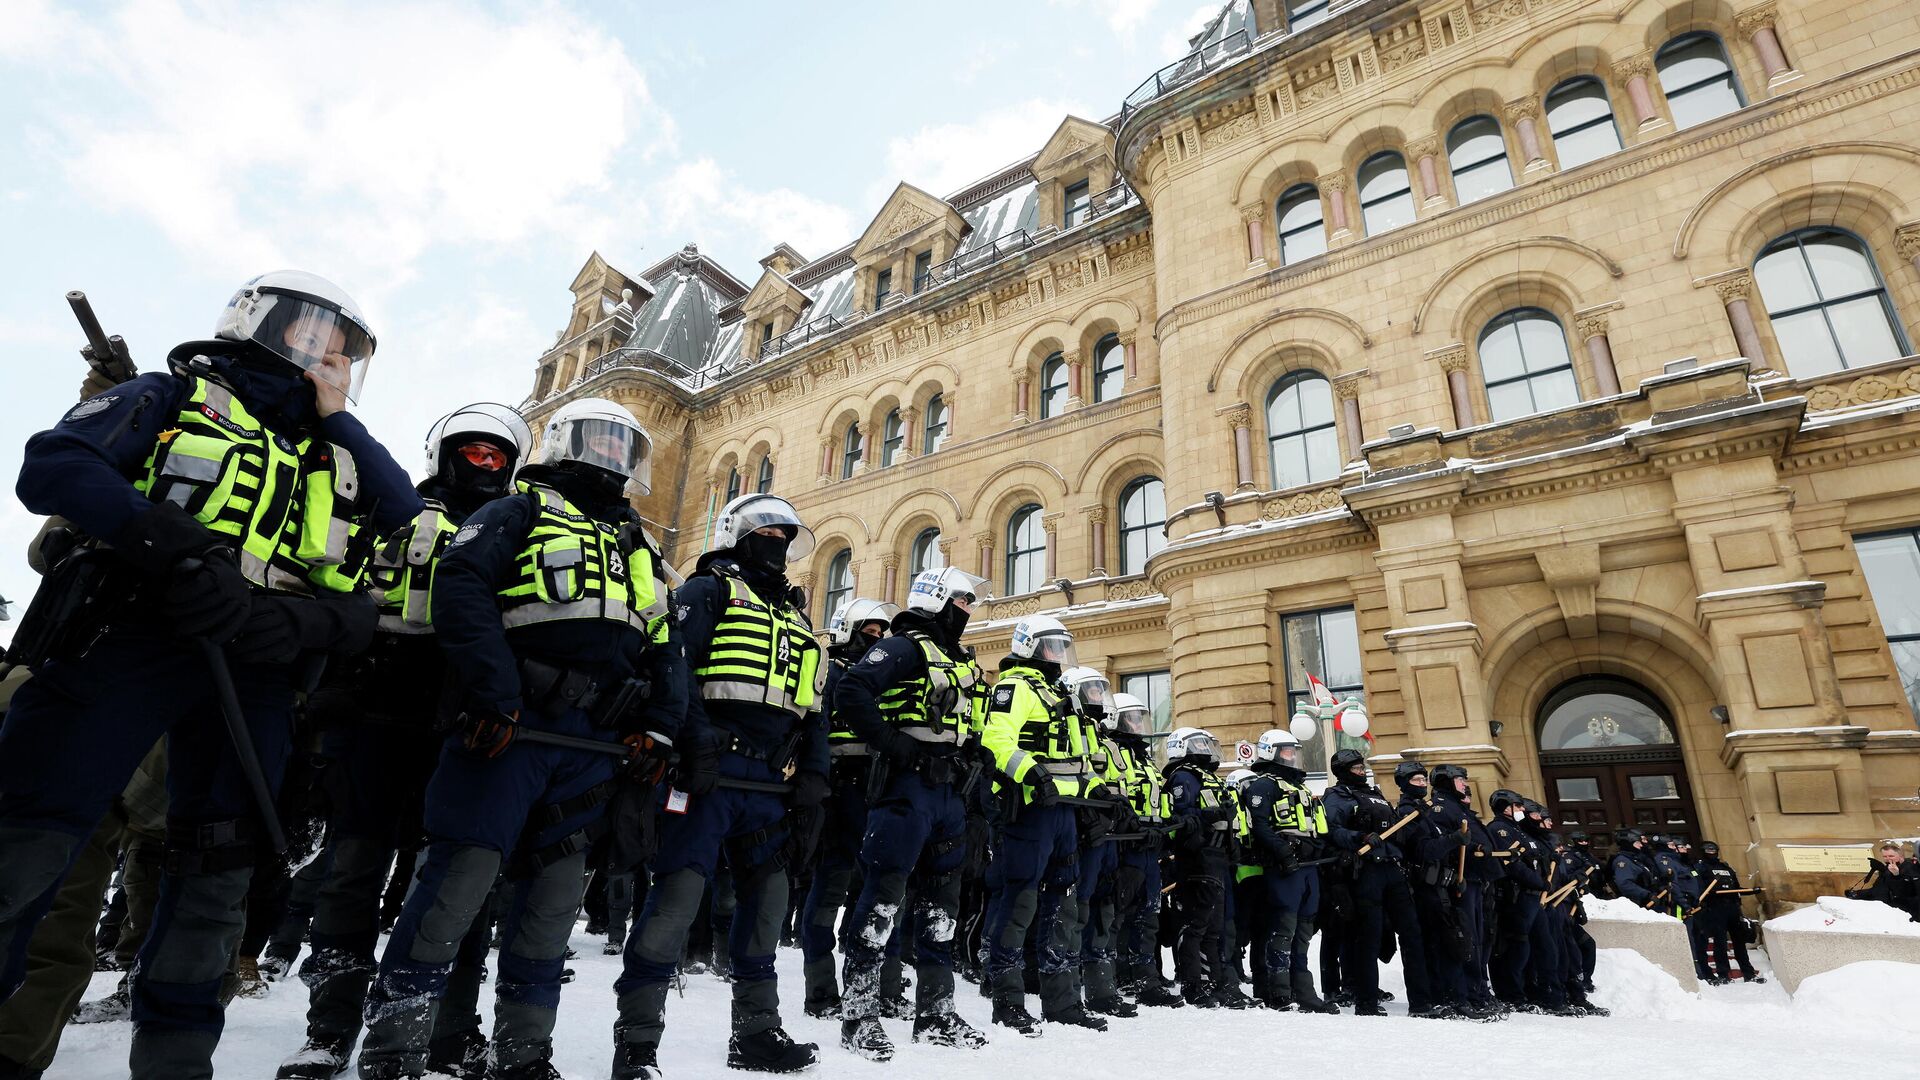 Canadian police officers stand guard as they work to restore normality to the capital while trucks and demonstrators continue to occupy the downtown core for more than three weeks to protest against pandemic restrictions in Ottawa, Ontario, Canada, February 19, 2022. Picture taken February 19, 2022 - Sputnik International, 1920, 22.02.2022